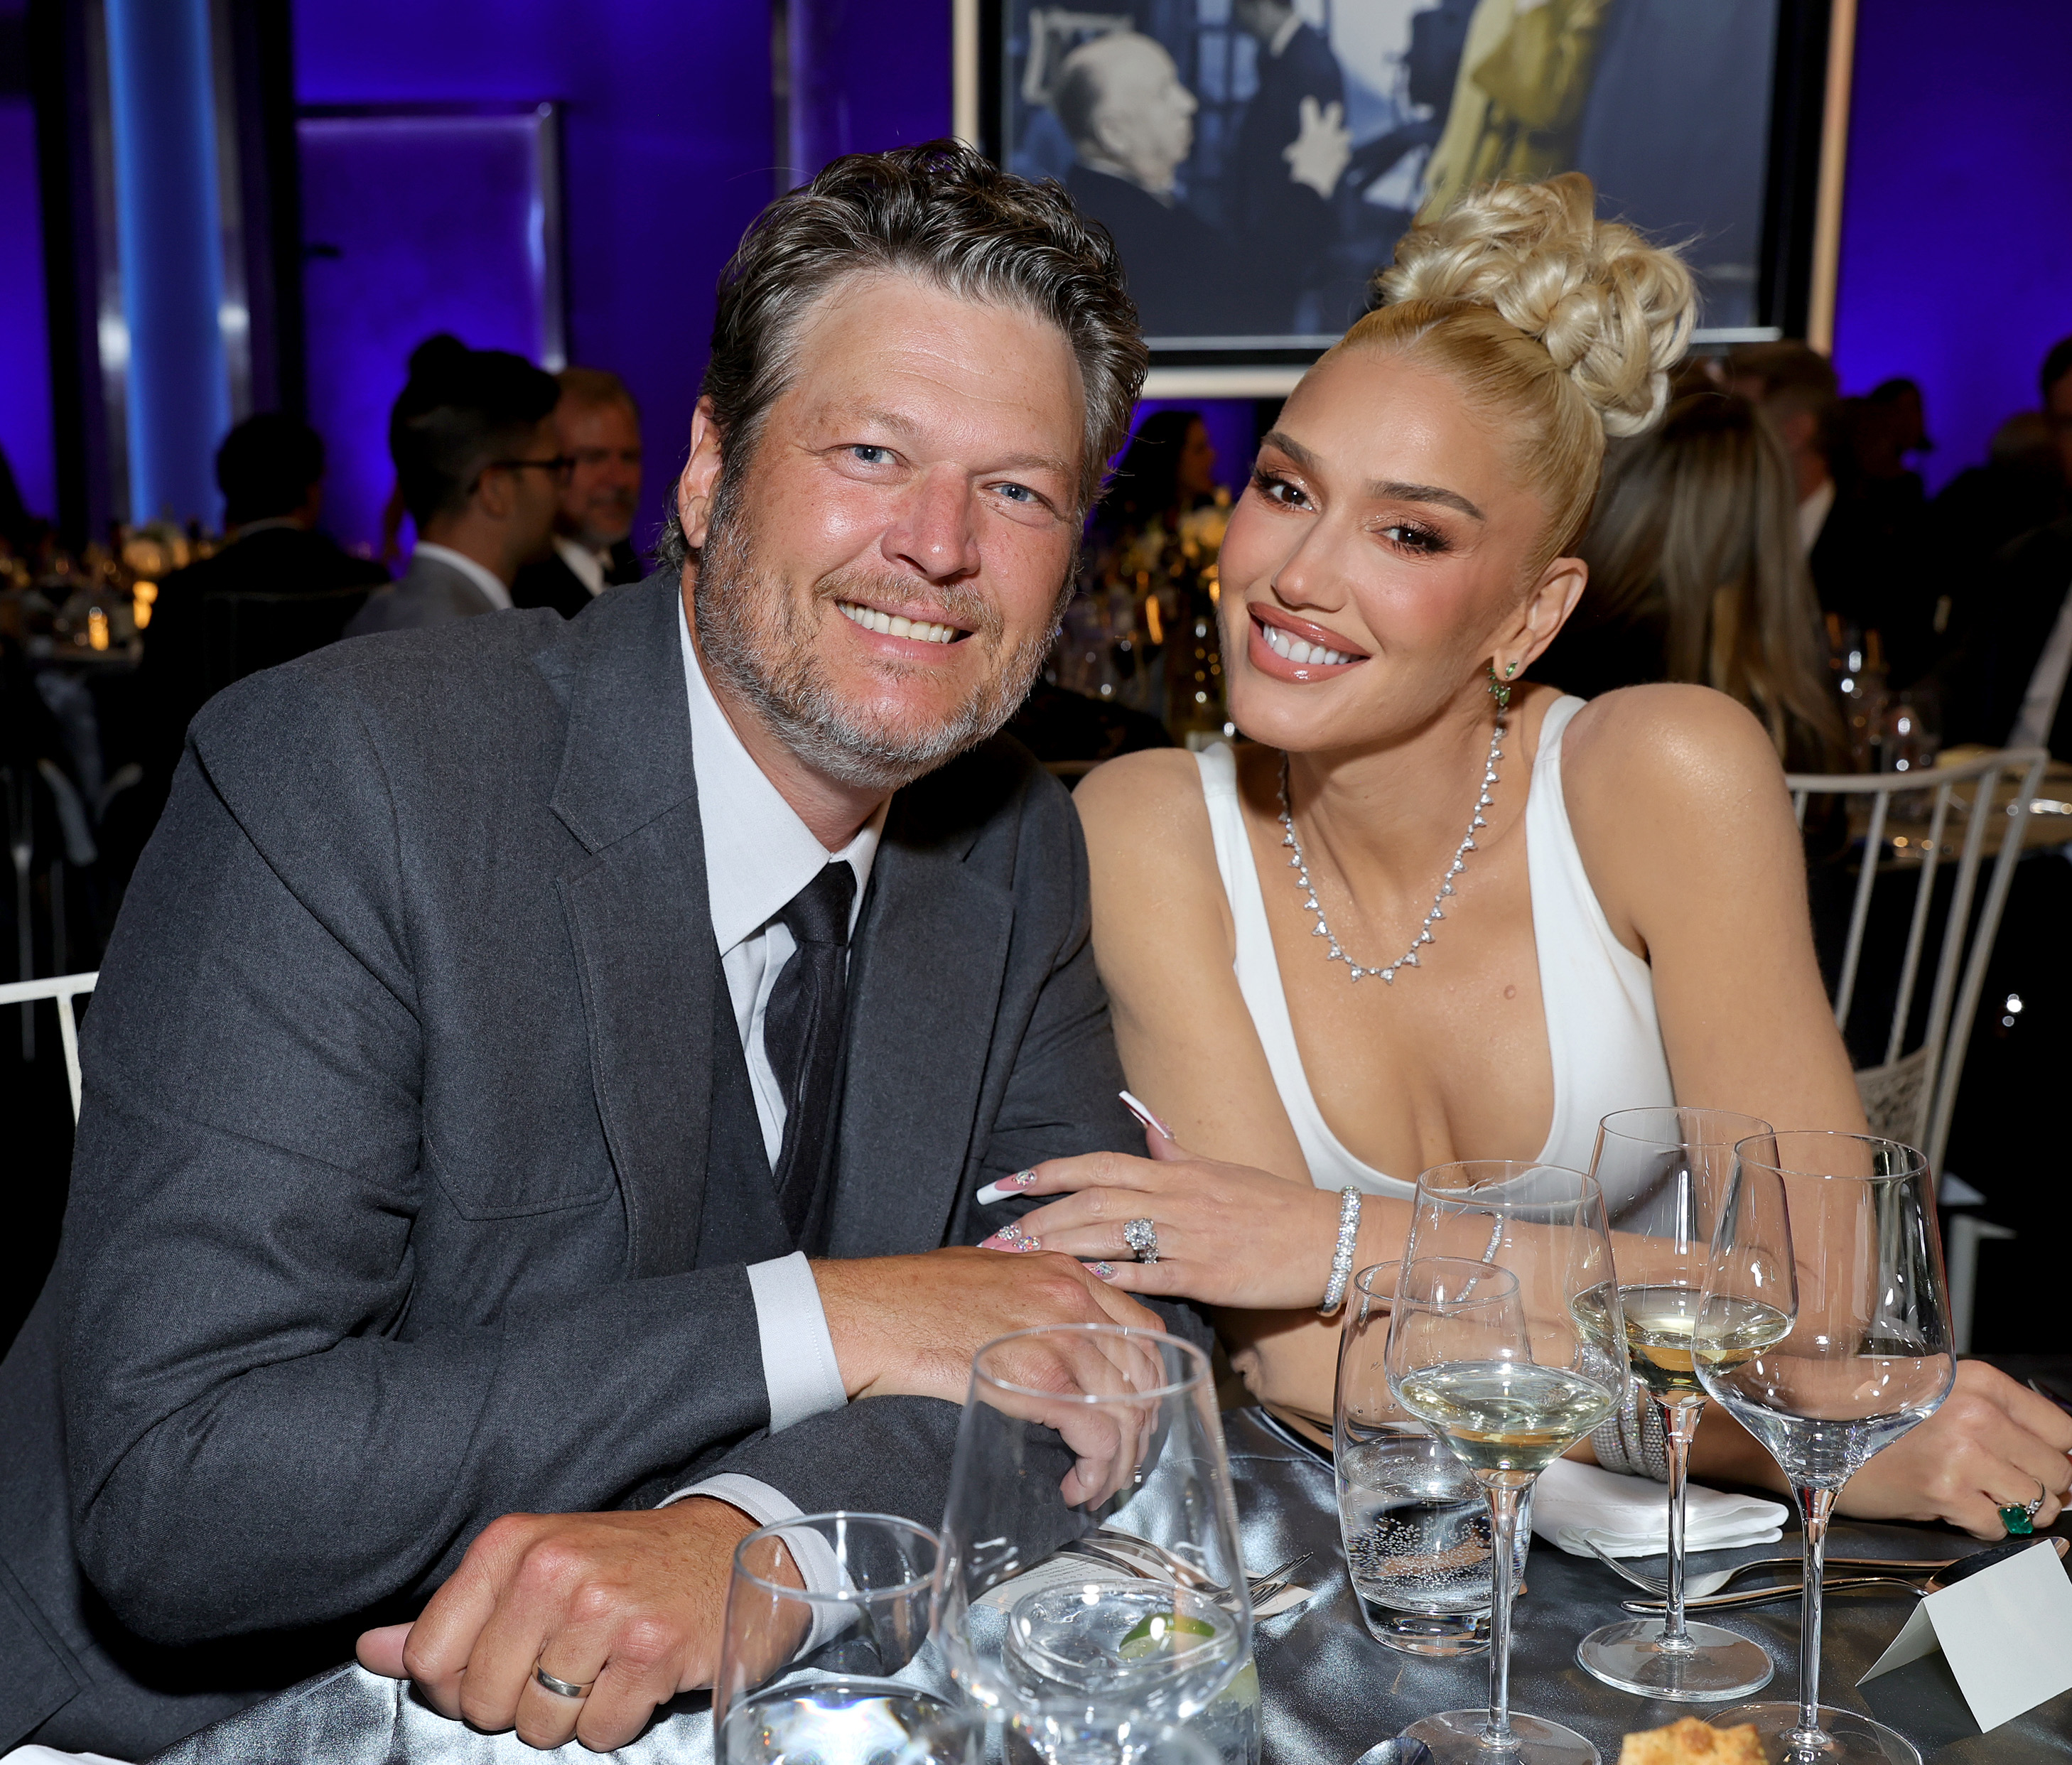 Blake Shelton and Gwen Stefani sitting together at a table with glasses in front. Gwen wears a white top and pearls, Blake in a suit